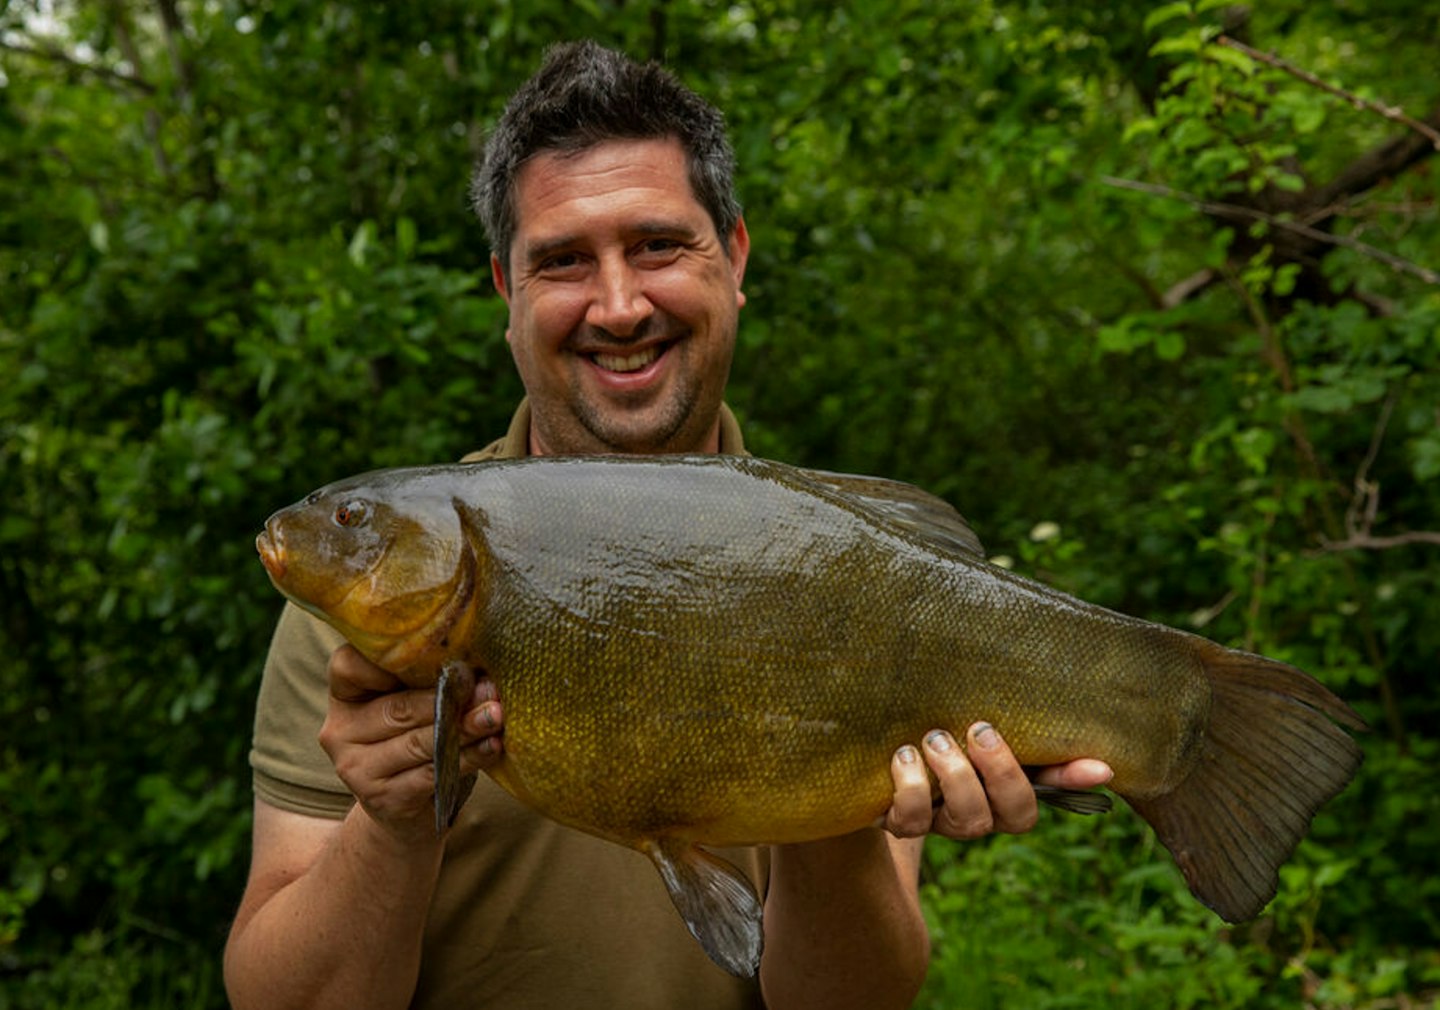 There have been some superb tench caught this week